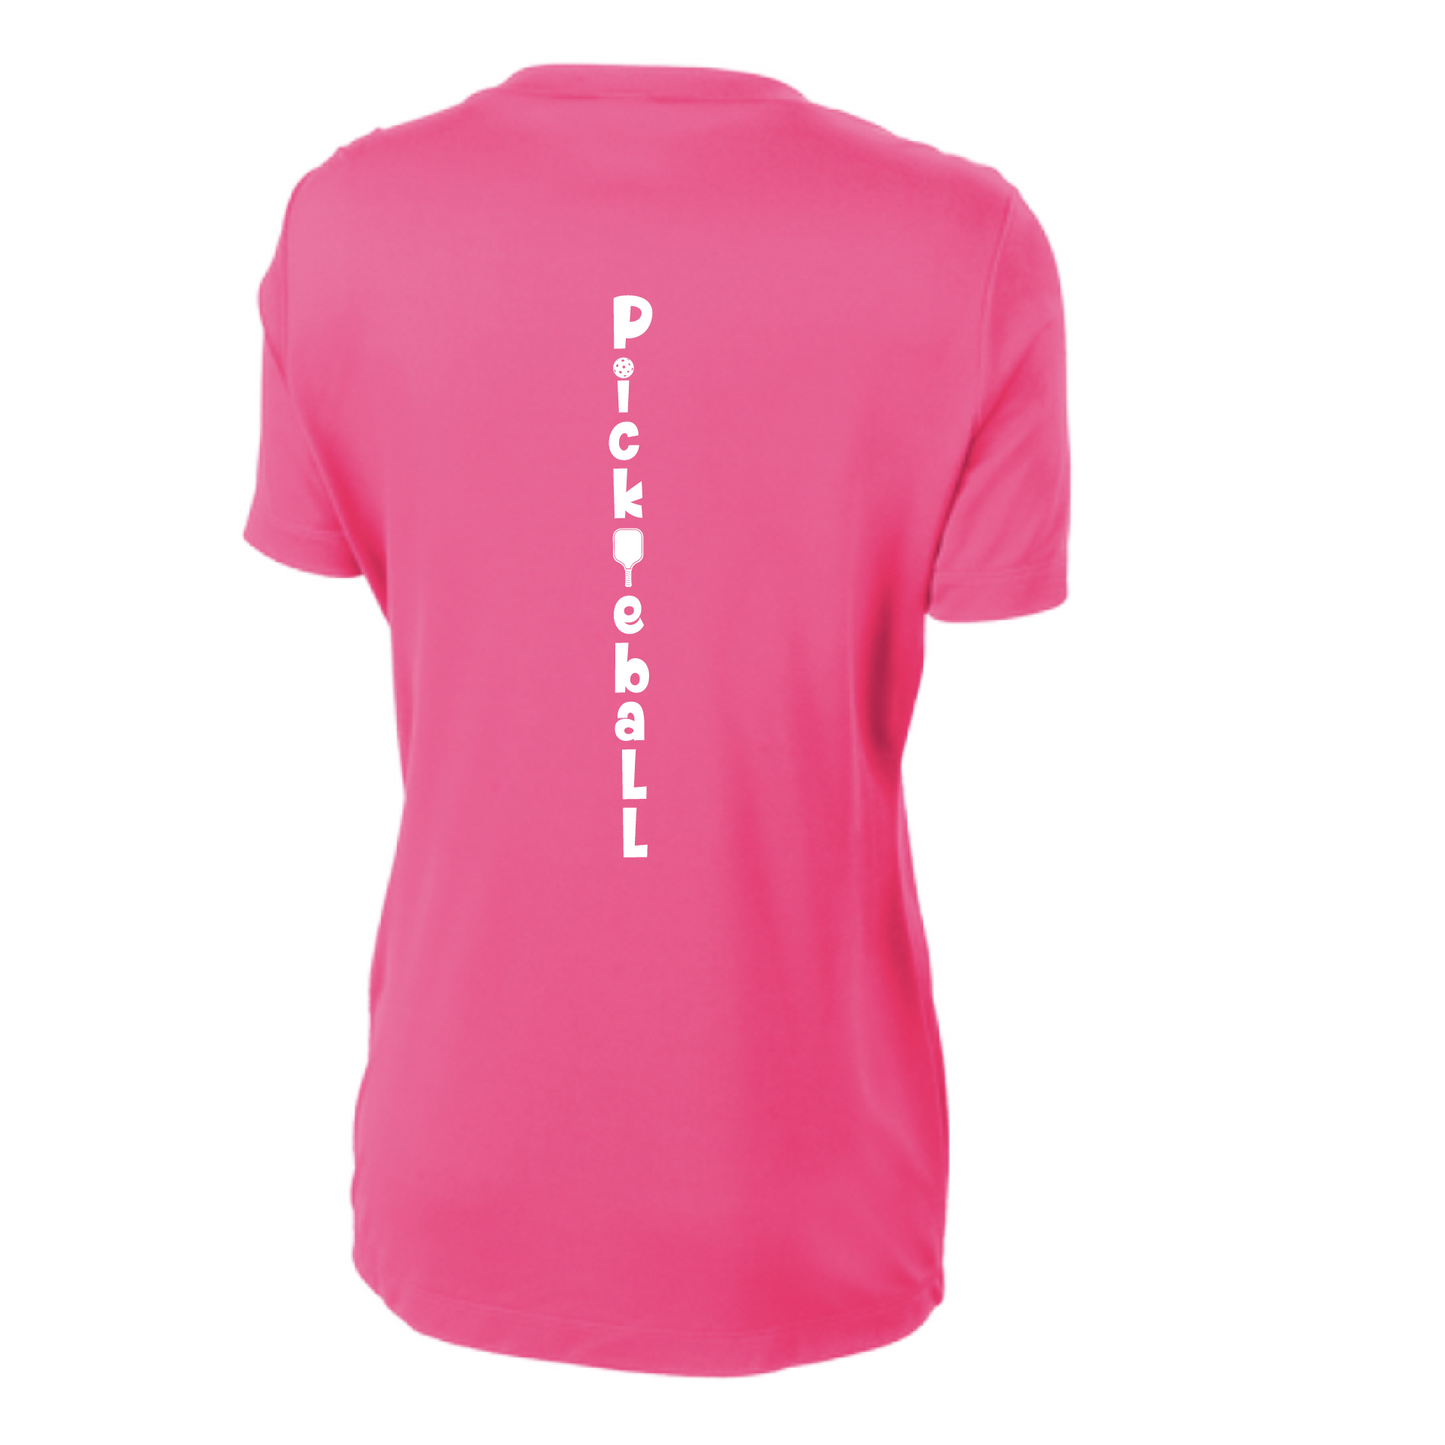 Pickleball Design: Pickleball Vertical Customizable Location  Women's Style: Short-Sleeve Crew-Neck  Shirt are lightweight, roomy and highly breathable. These moisture-wicking shirts are designed for athletic performance. They feature PosiCharge technology to lock in color and prevent logos from fading. Removable tag and set-in sleeves for comfort.